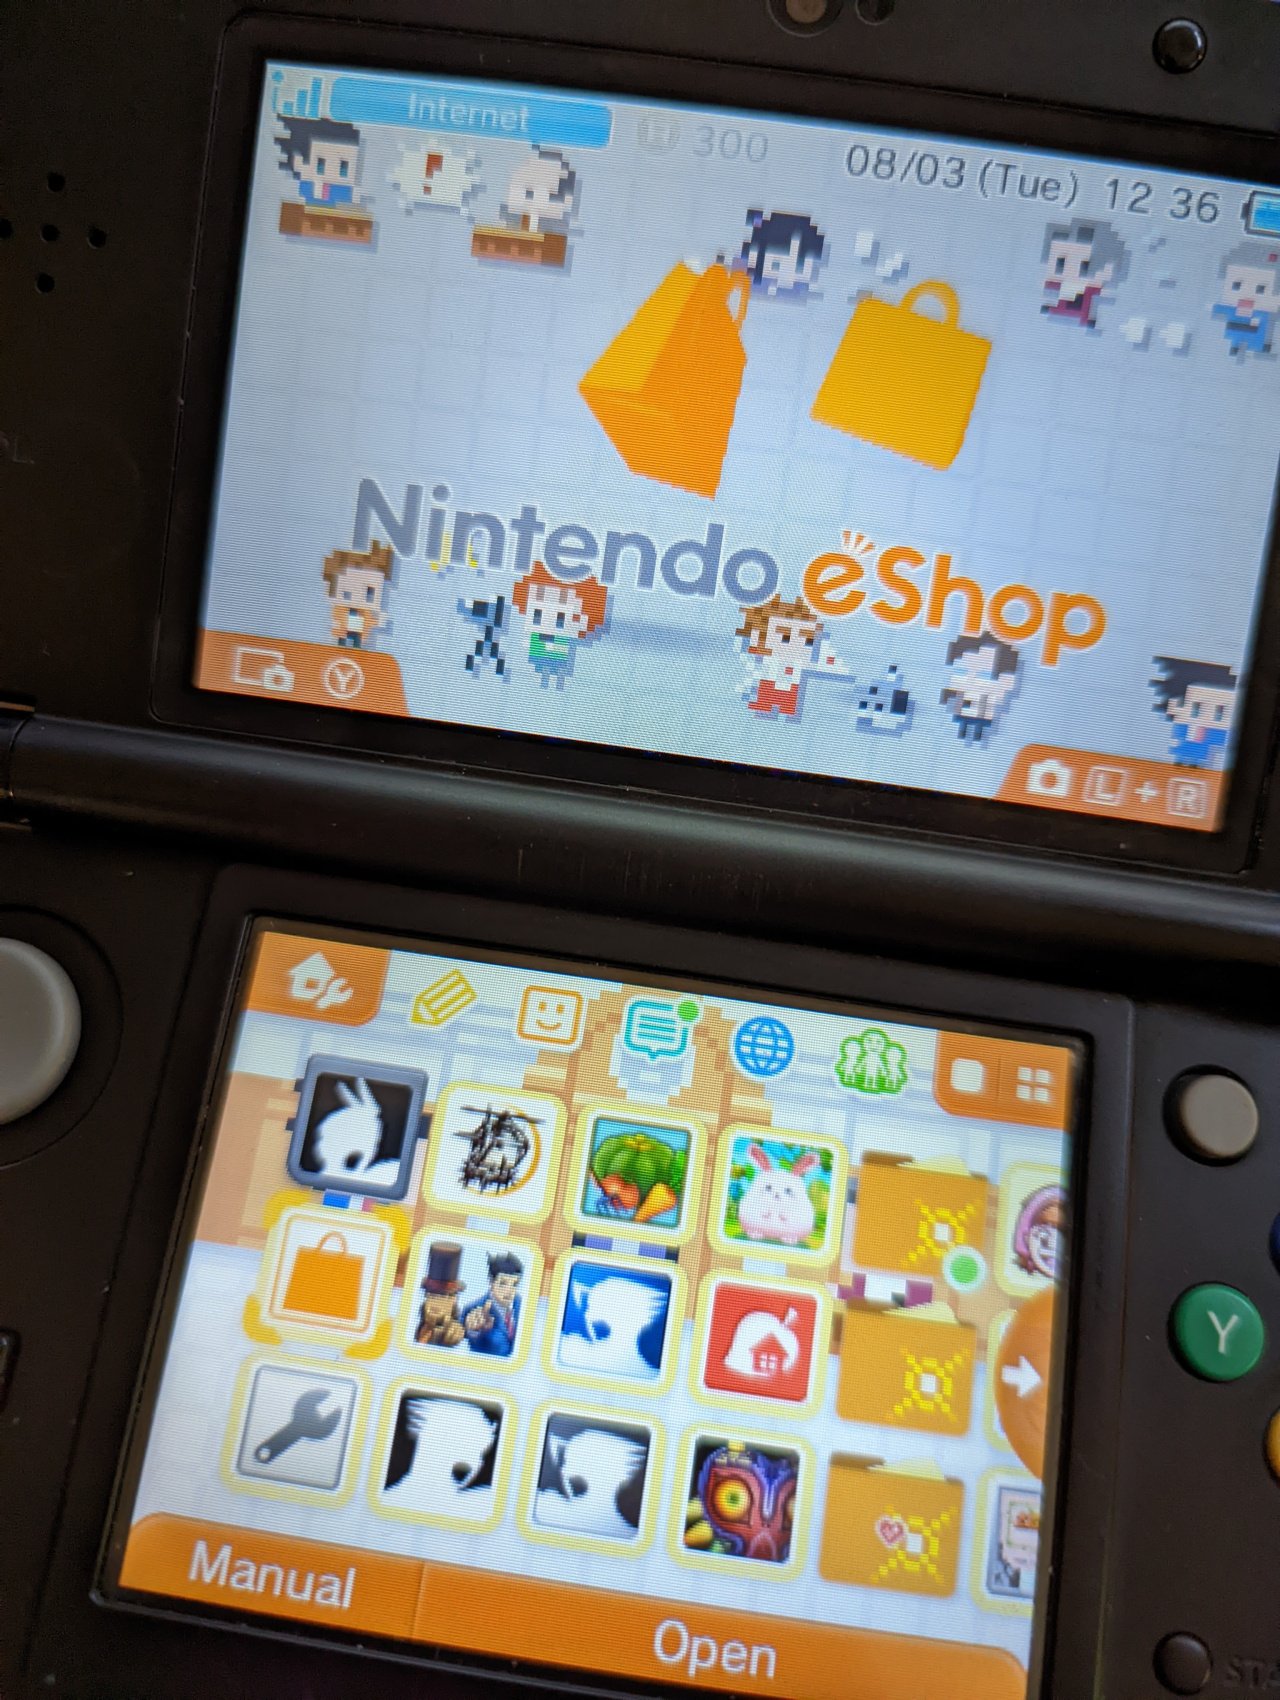 How To Games From 3DS eShop - Downloading Digital Games Already Own | Nintendo Life